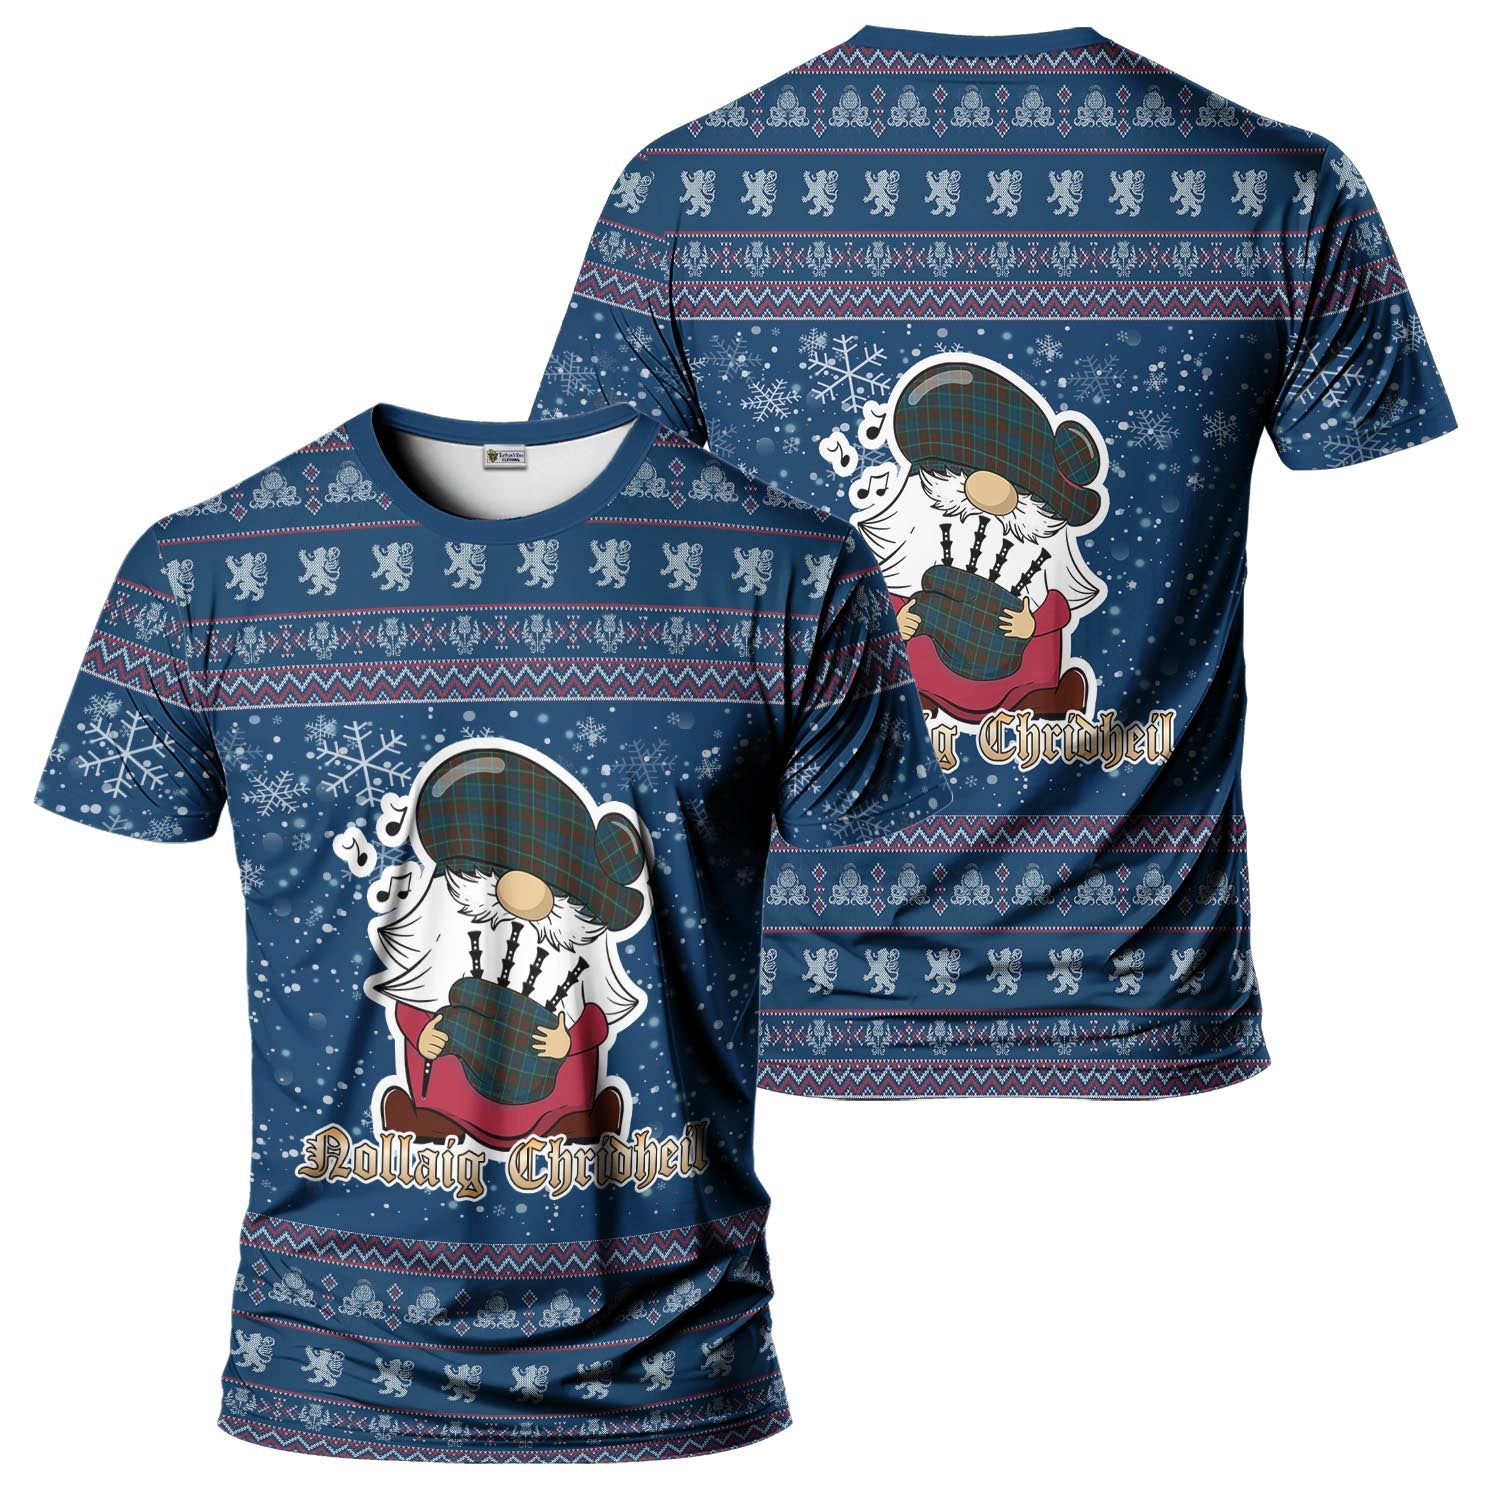 MacConnell Clan Christmas Family T-Shirt with Funny Gnome Playing Bagpipes Kid's Shirt Blue - Tartanvibesclothing